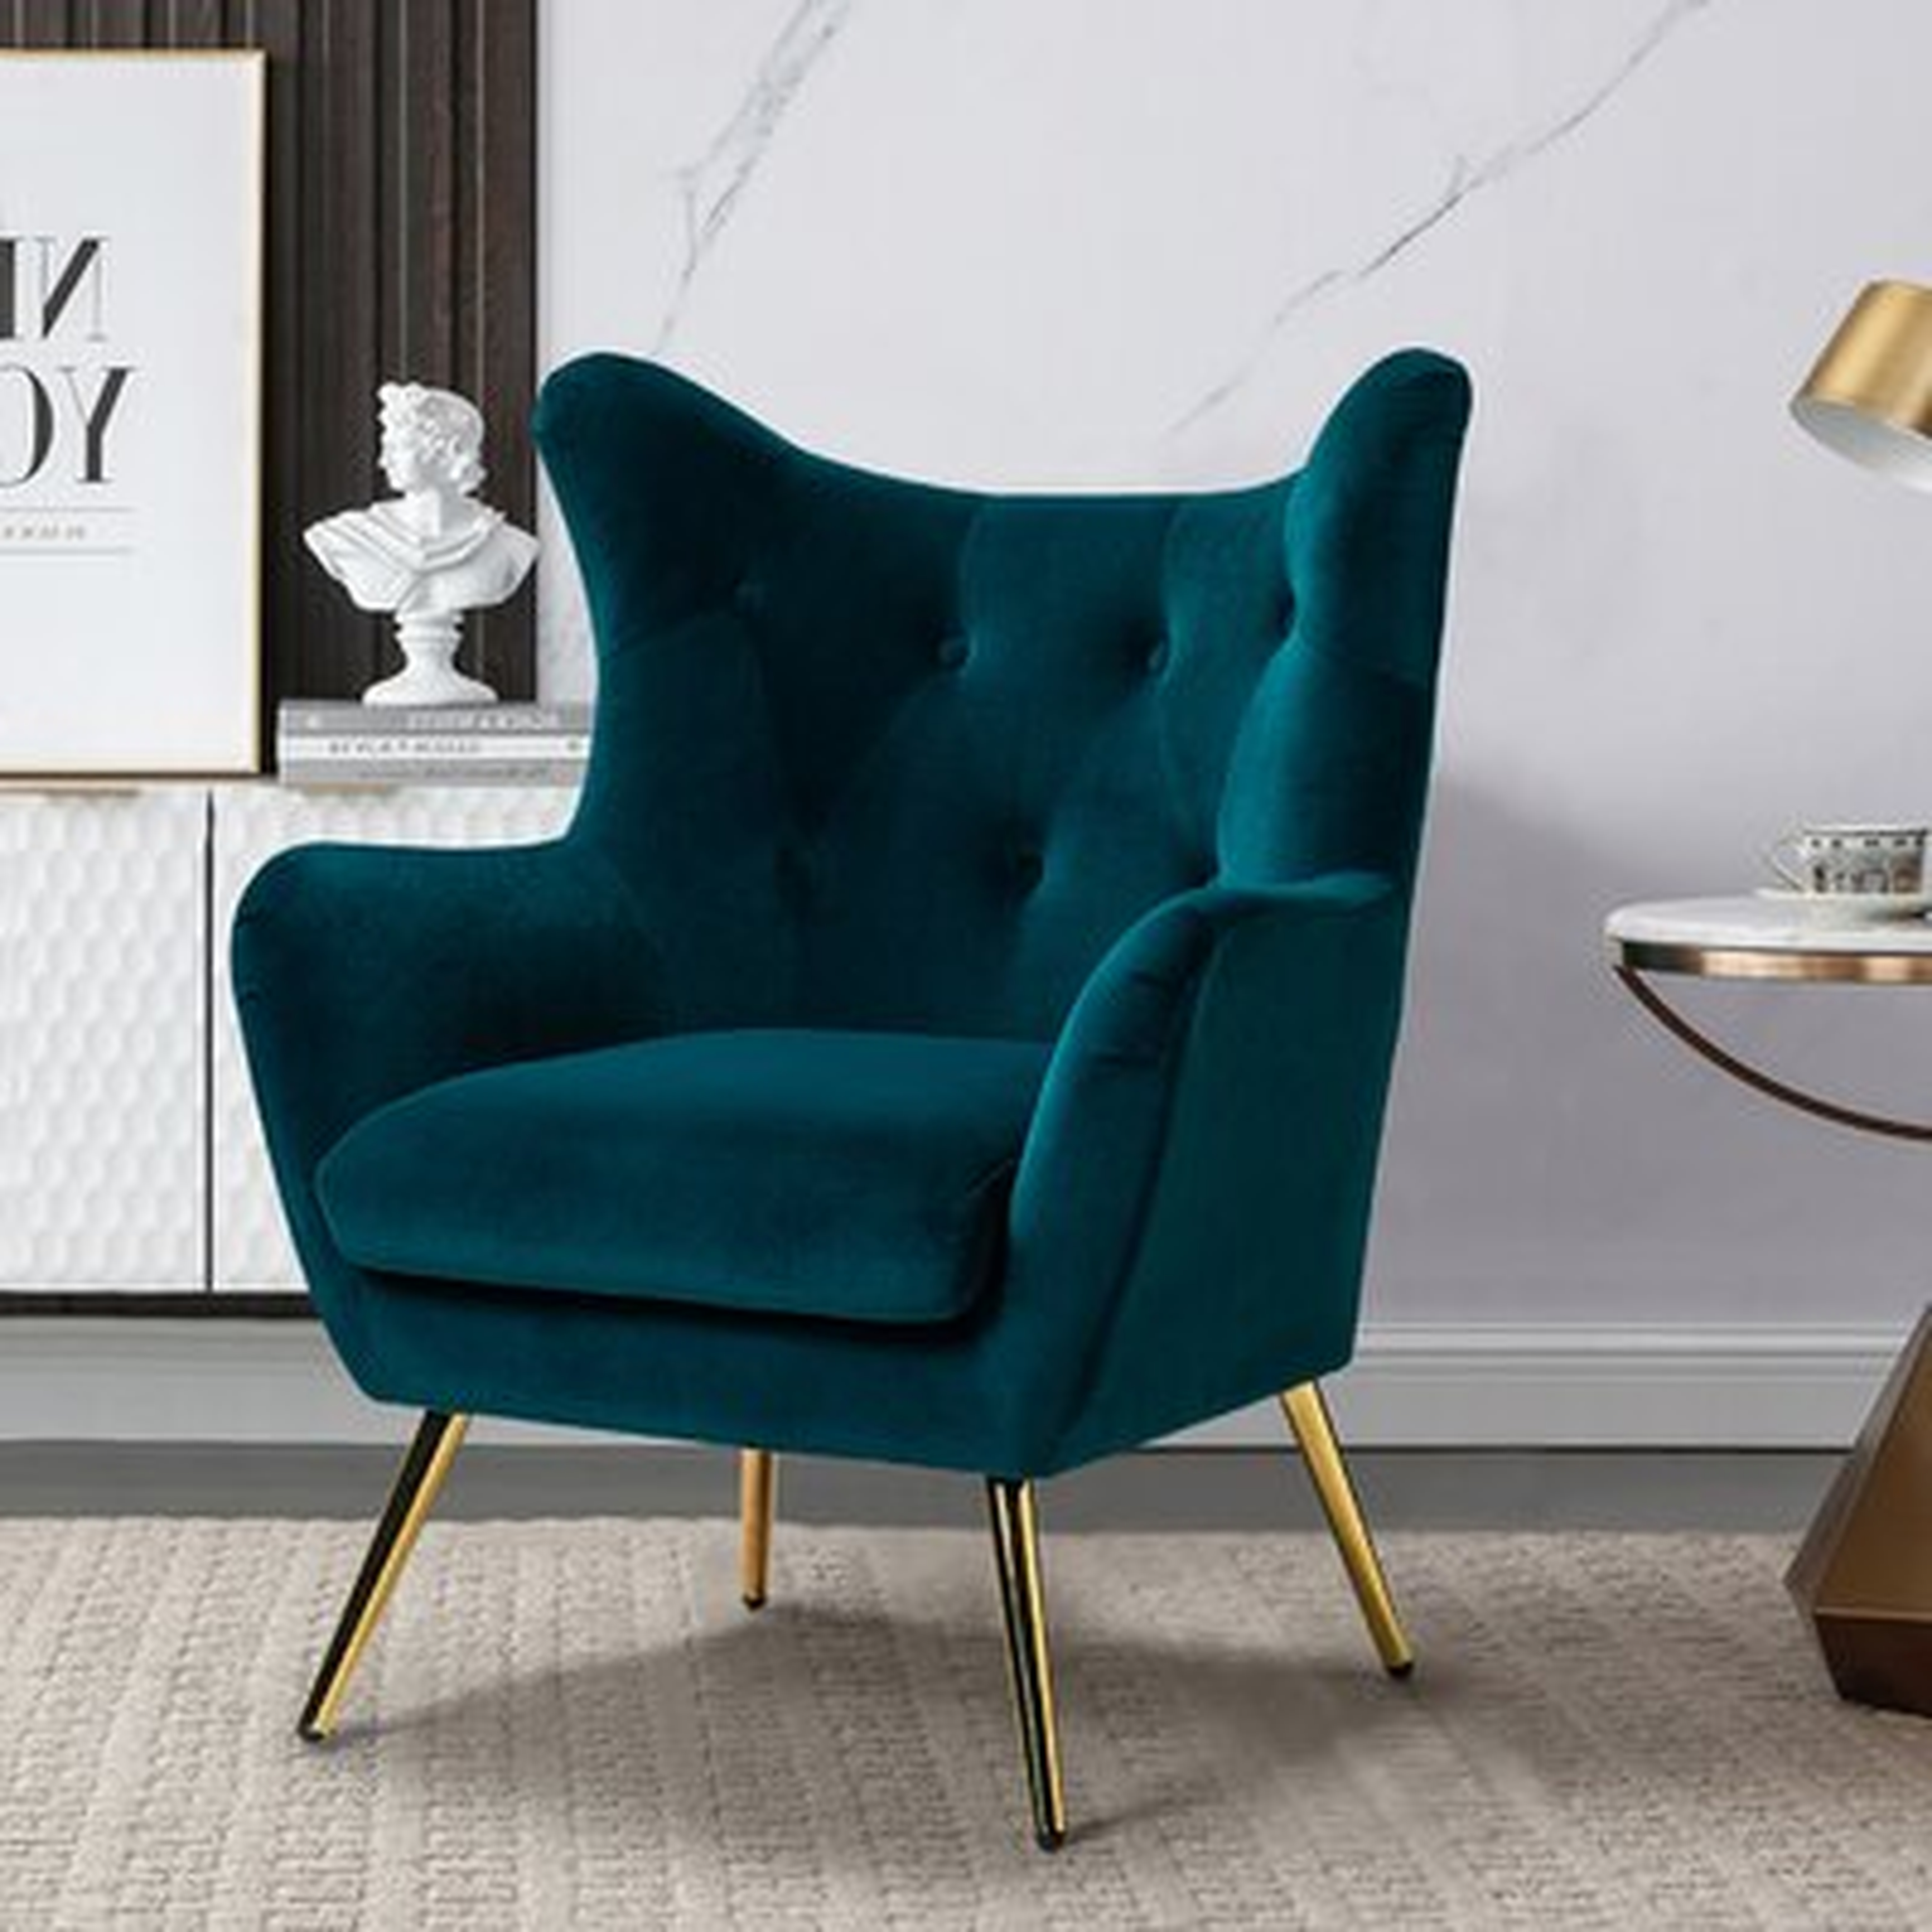 Avianna 29.25" Wide Tufted Polyester Wingback Chair - Wayfair